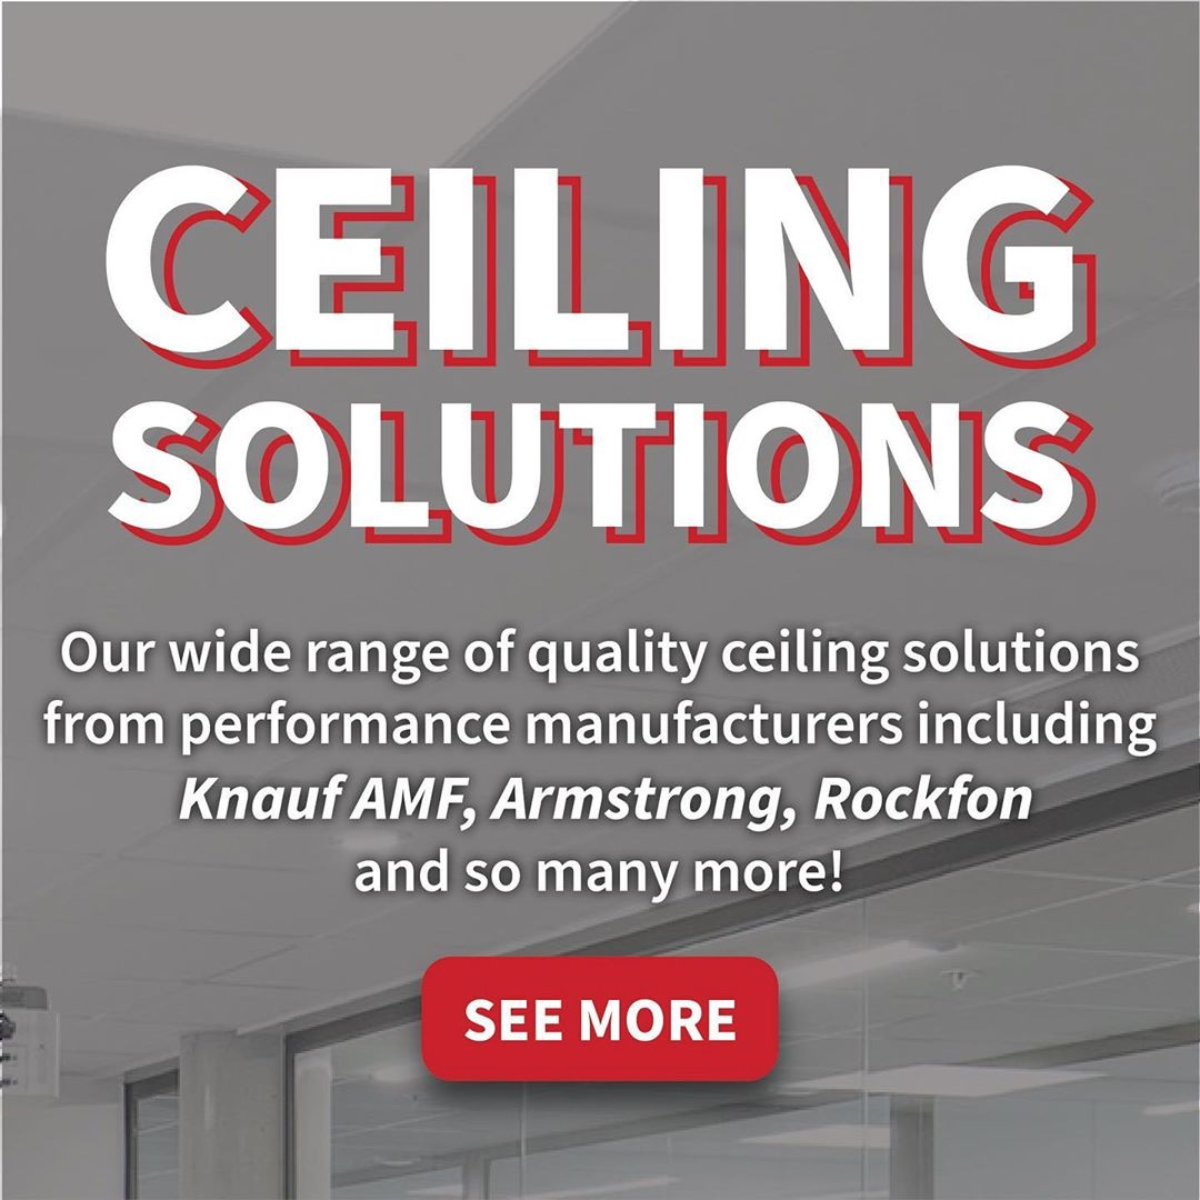 Needing Ceiling tiles? Well we can help you out.

Check out our full range of ceilings and see what suits your needs!

Get in contact:
Theo@buildingmaterials.co.uk or 01628 876793

#Ceilinggrid #MFceiling #Ceilings #buildingmaterials